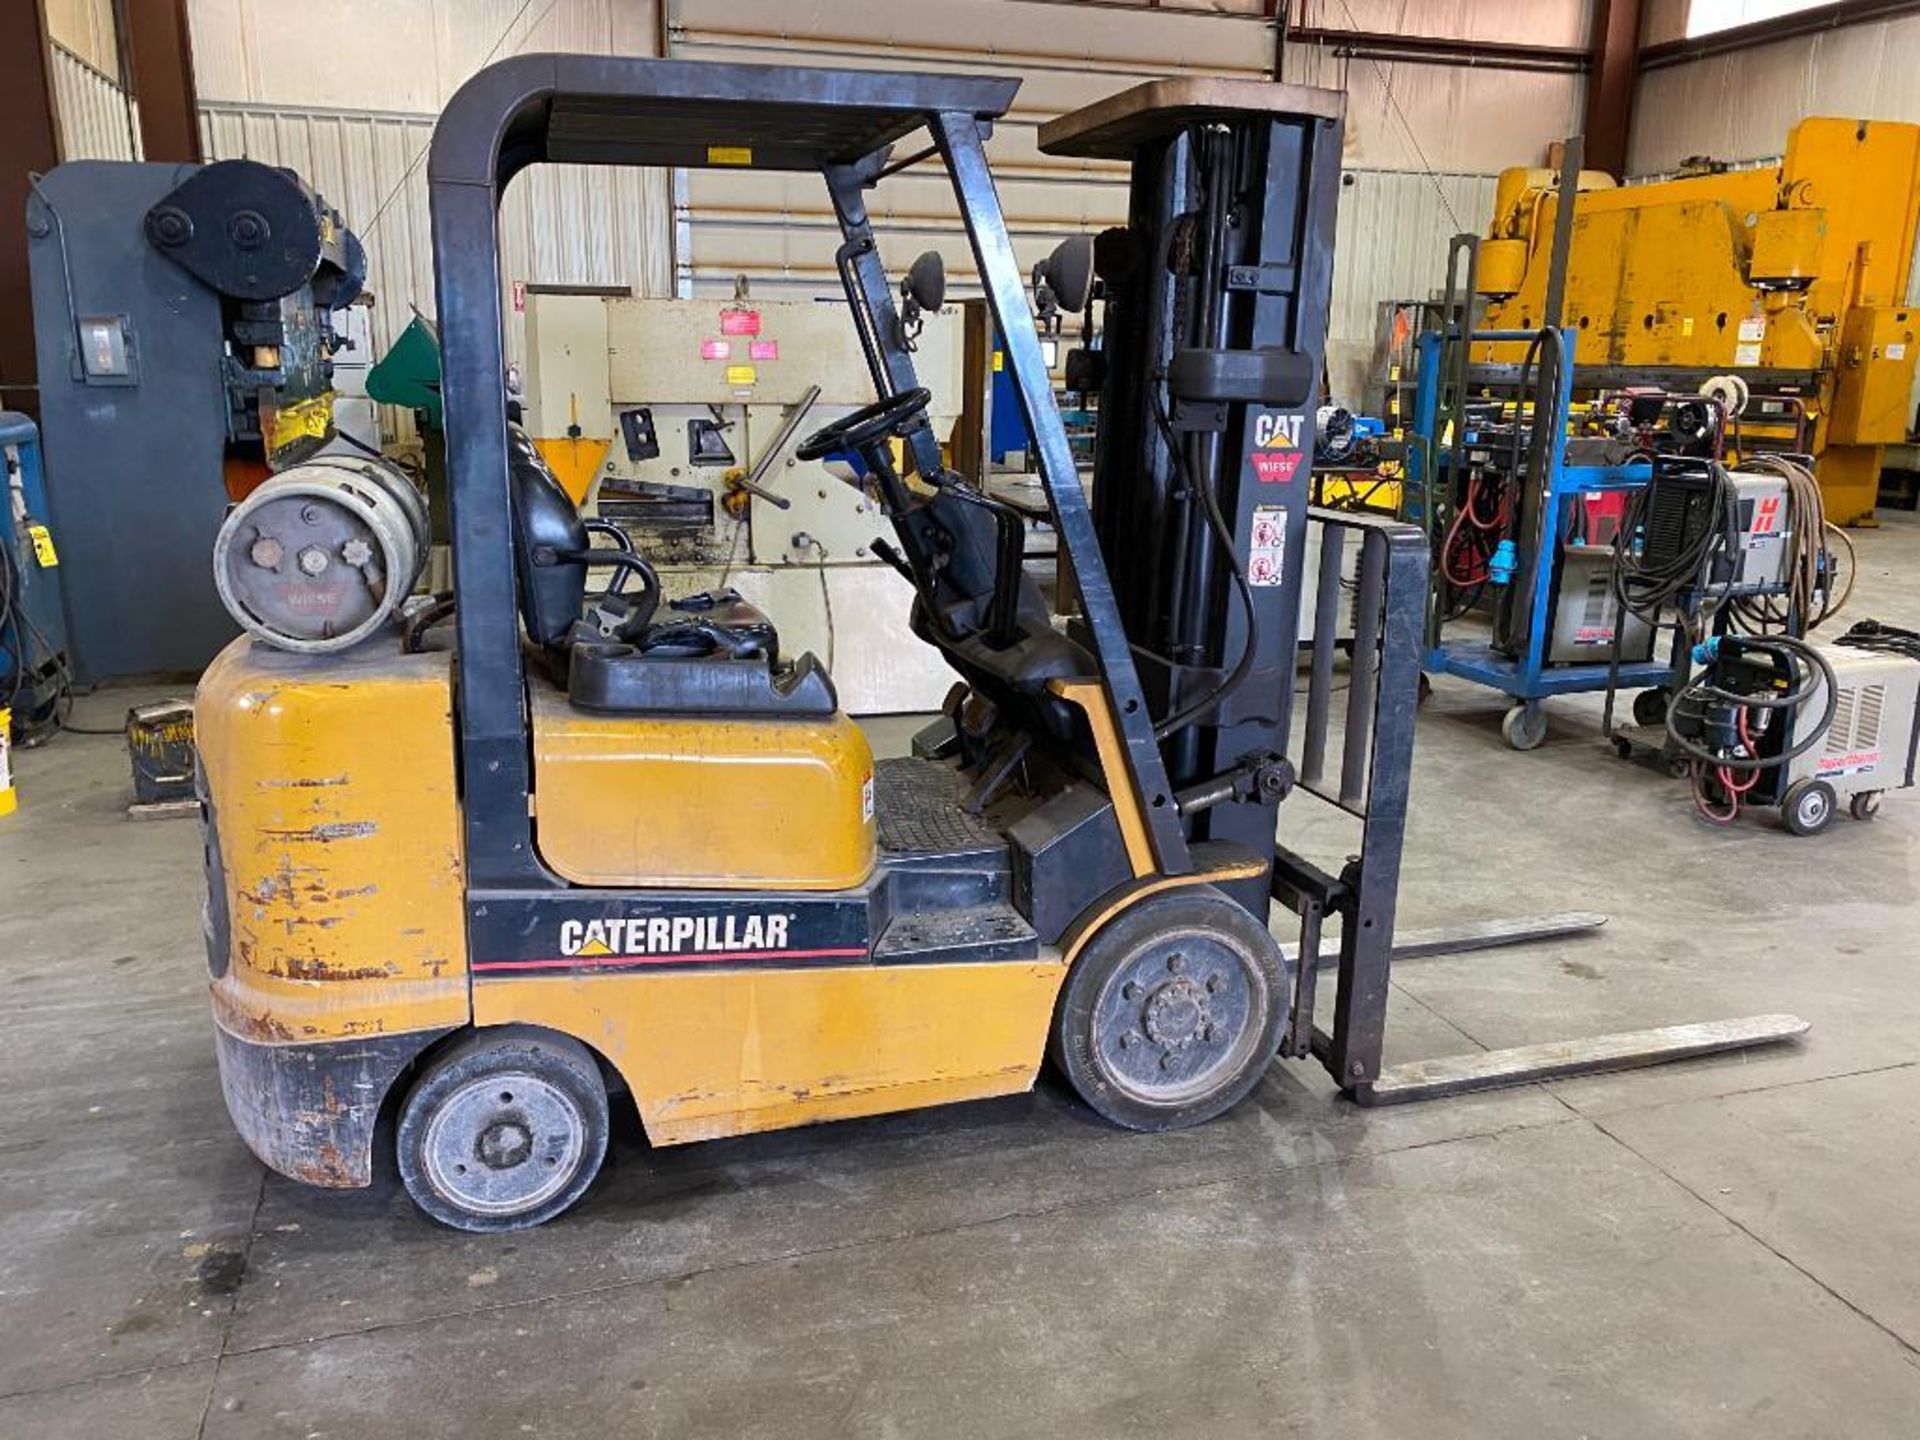 Caterpillar 5,000-LB. Capacity Forklift, Model GC25K, S/N AT82C06759, LPG, Solid Tires, 3-Stage Mast - Image 3 of 5